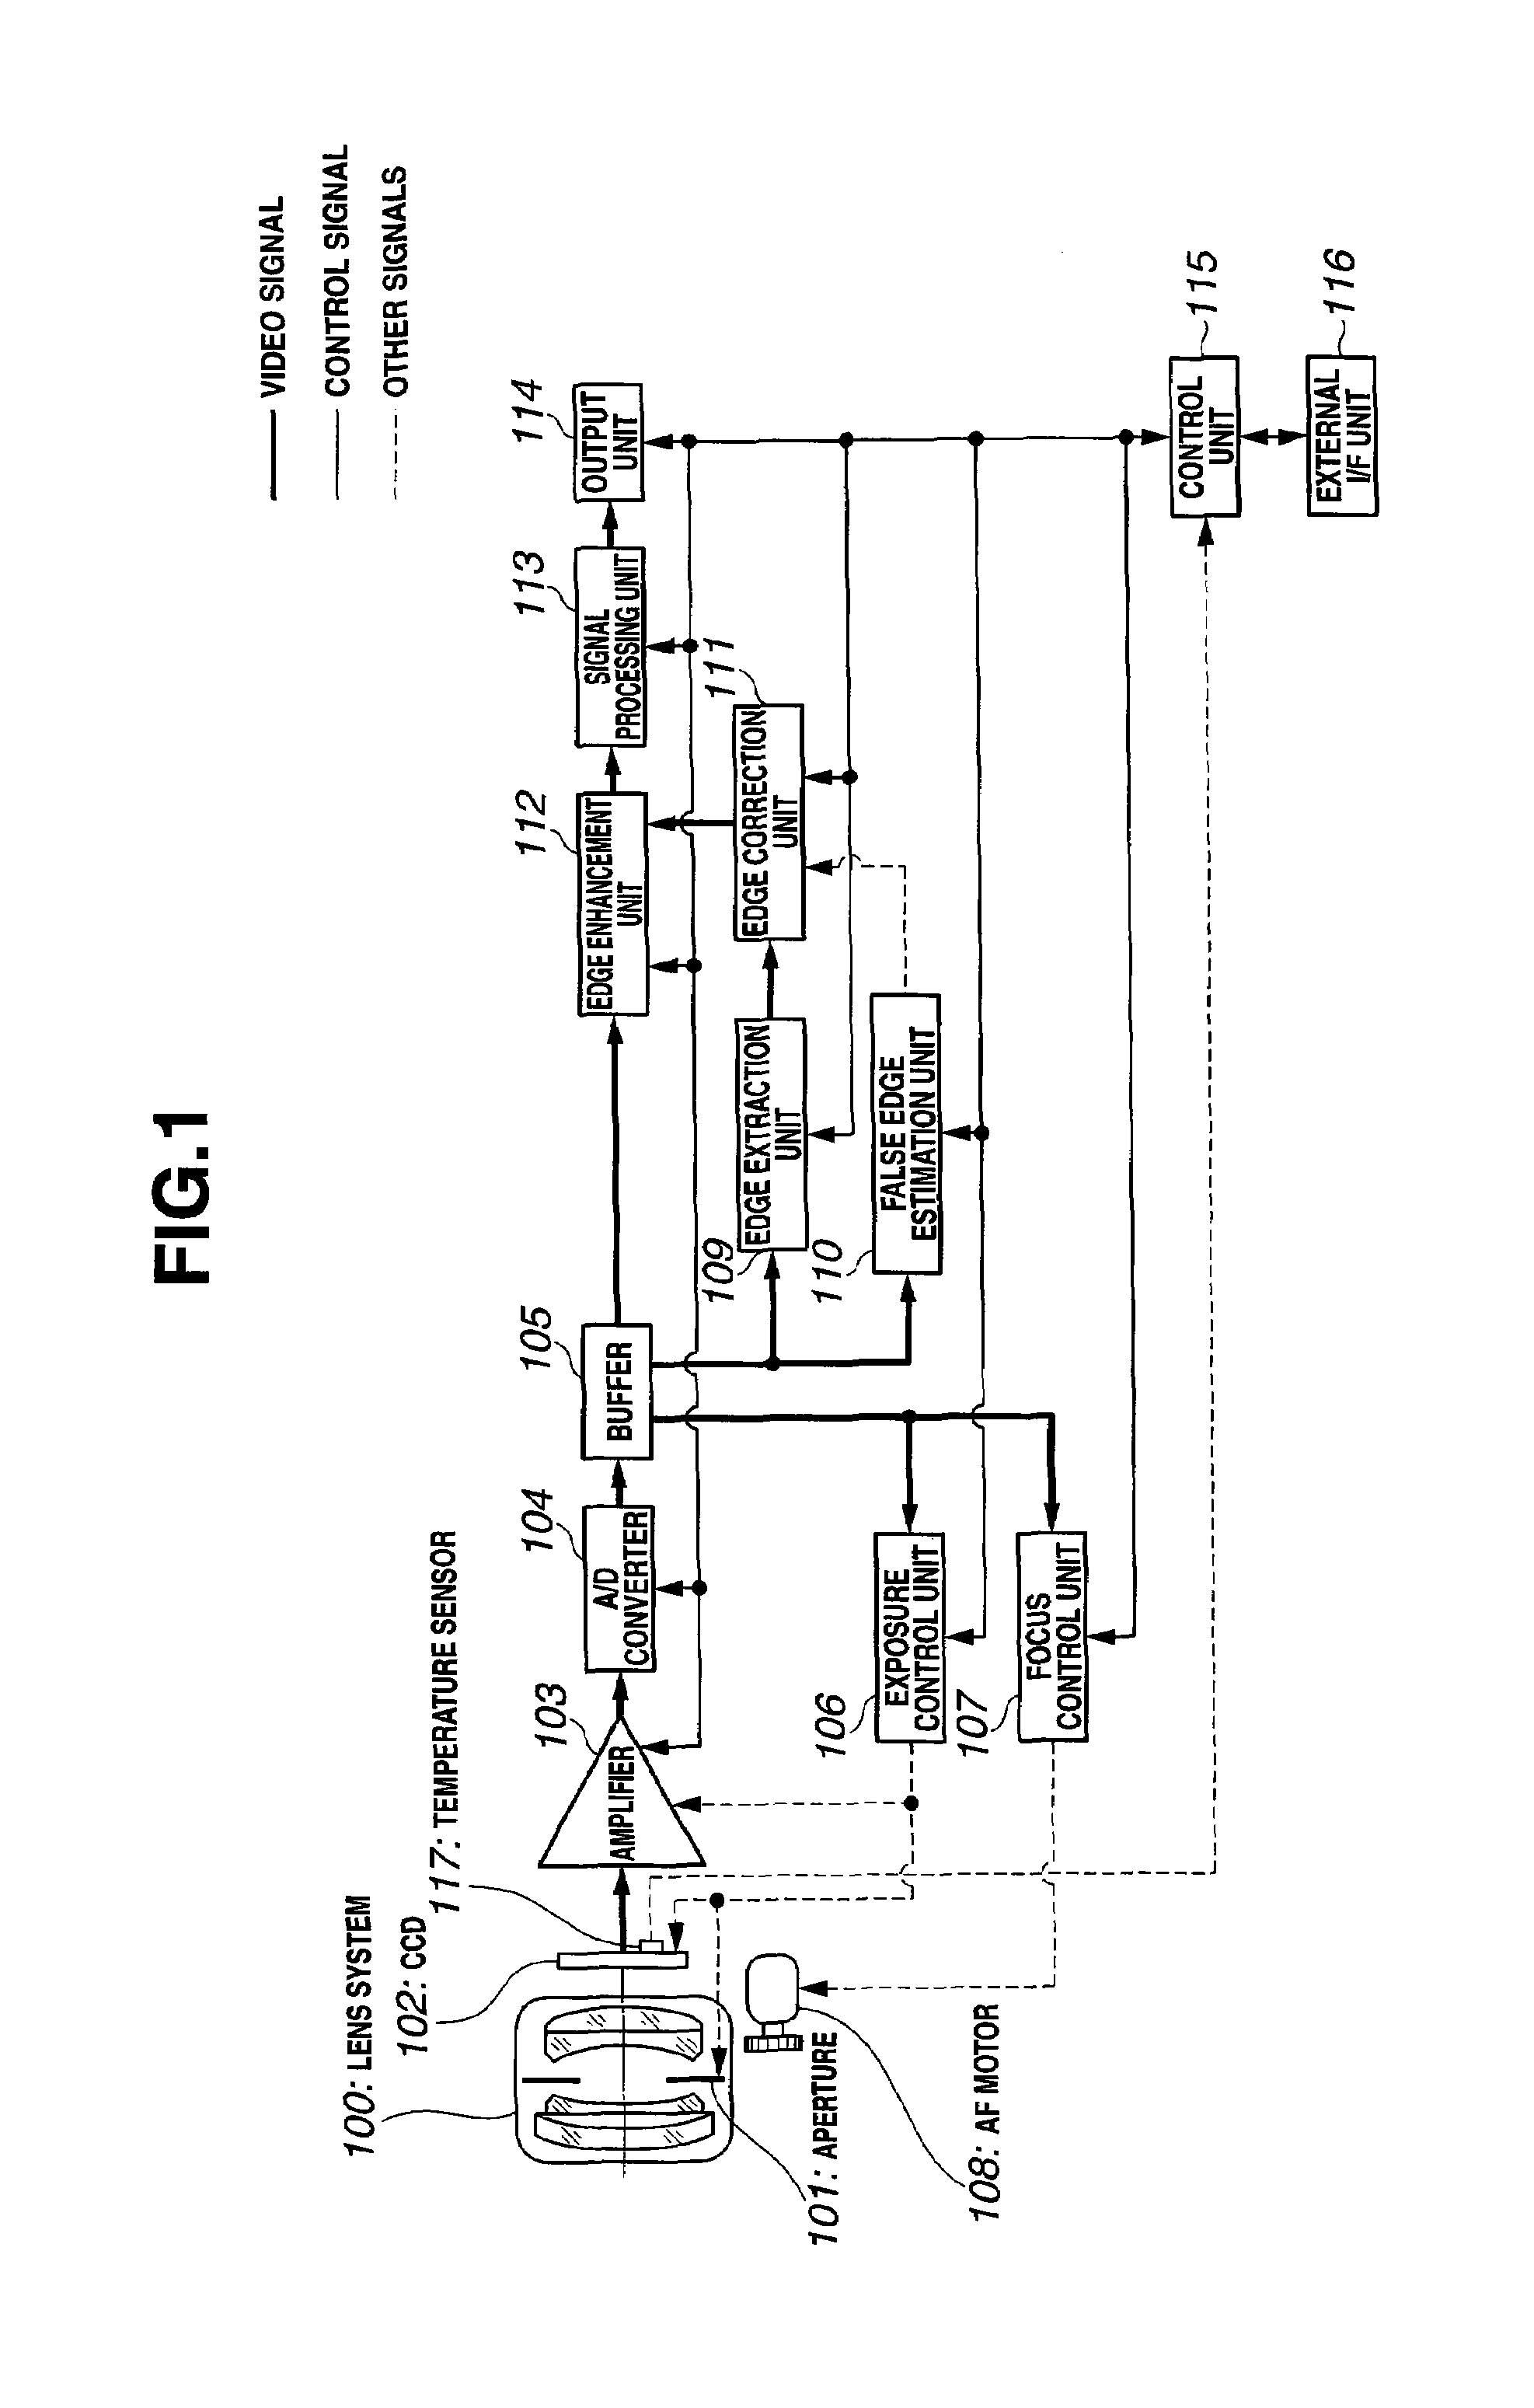 Image processing system, image processing method, and image processing program product